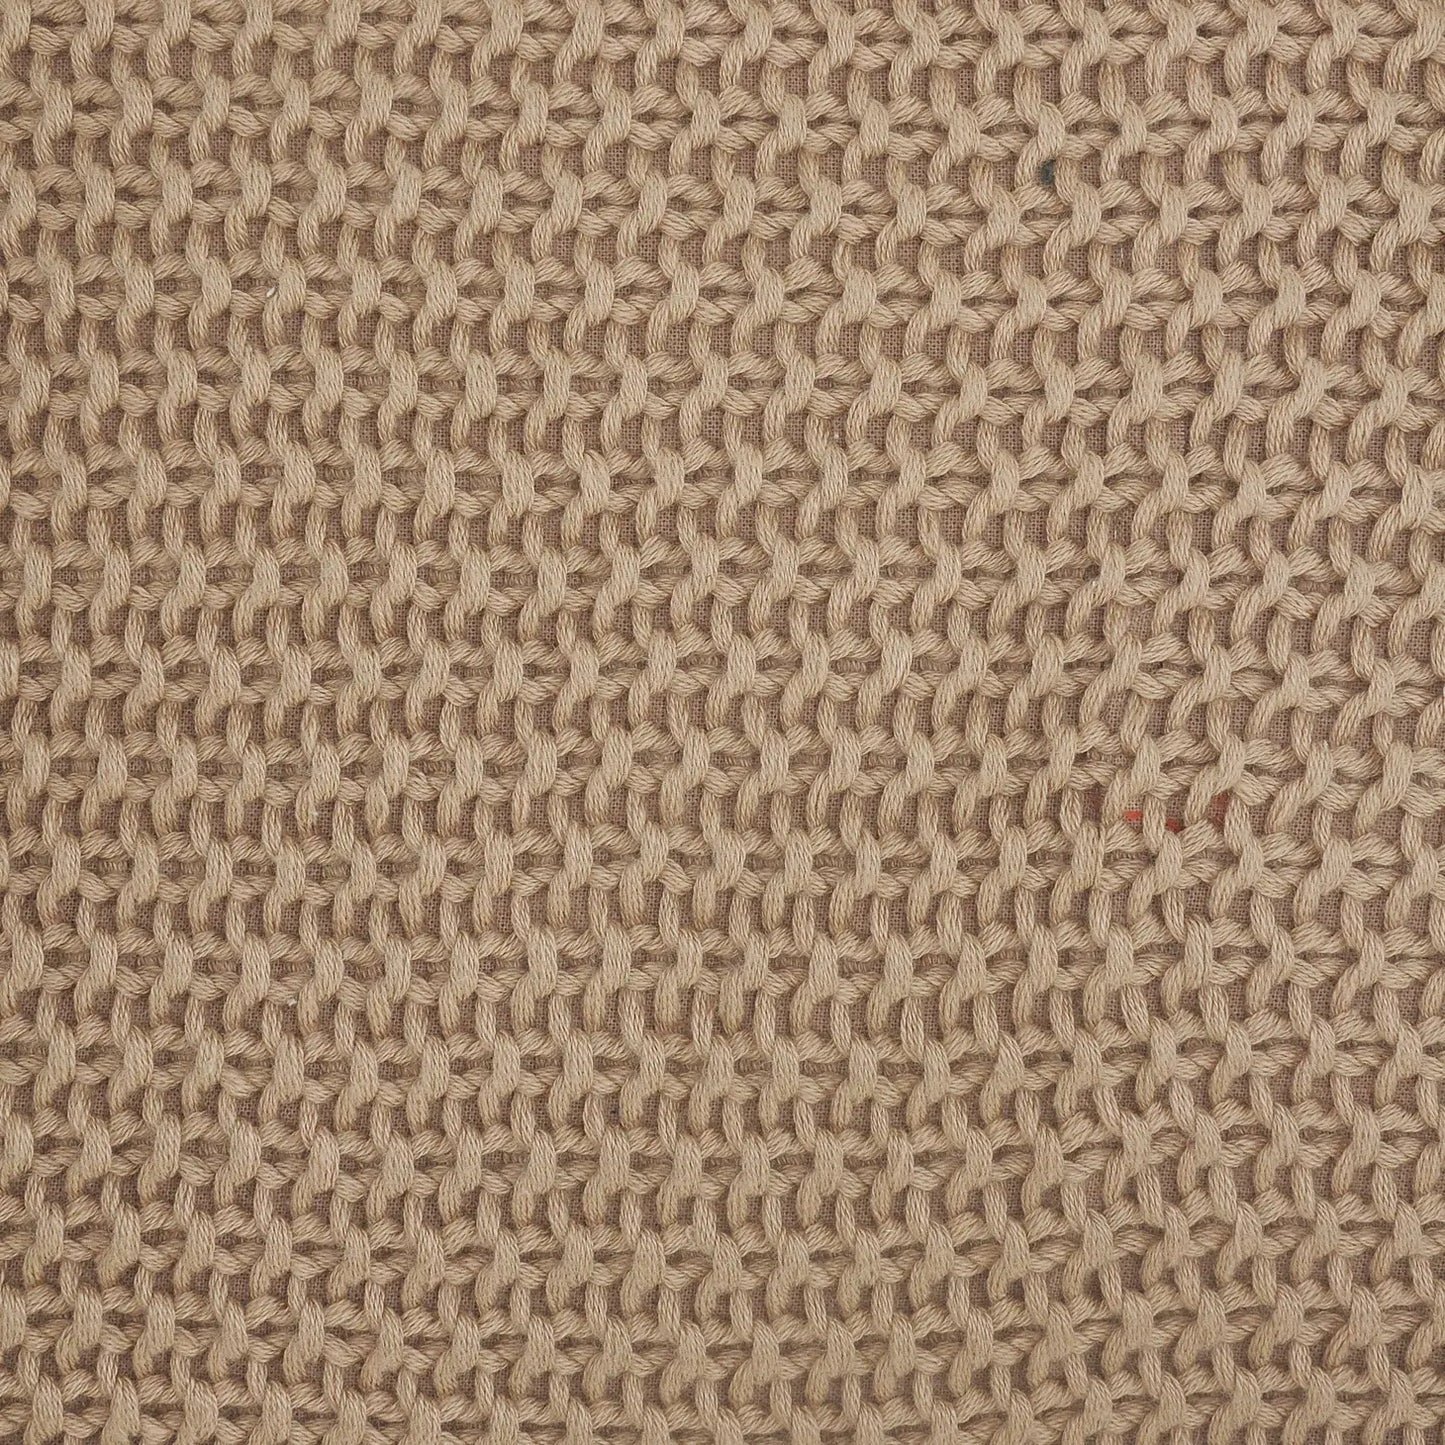 Taupe Knit Square Throw Pillow